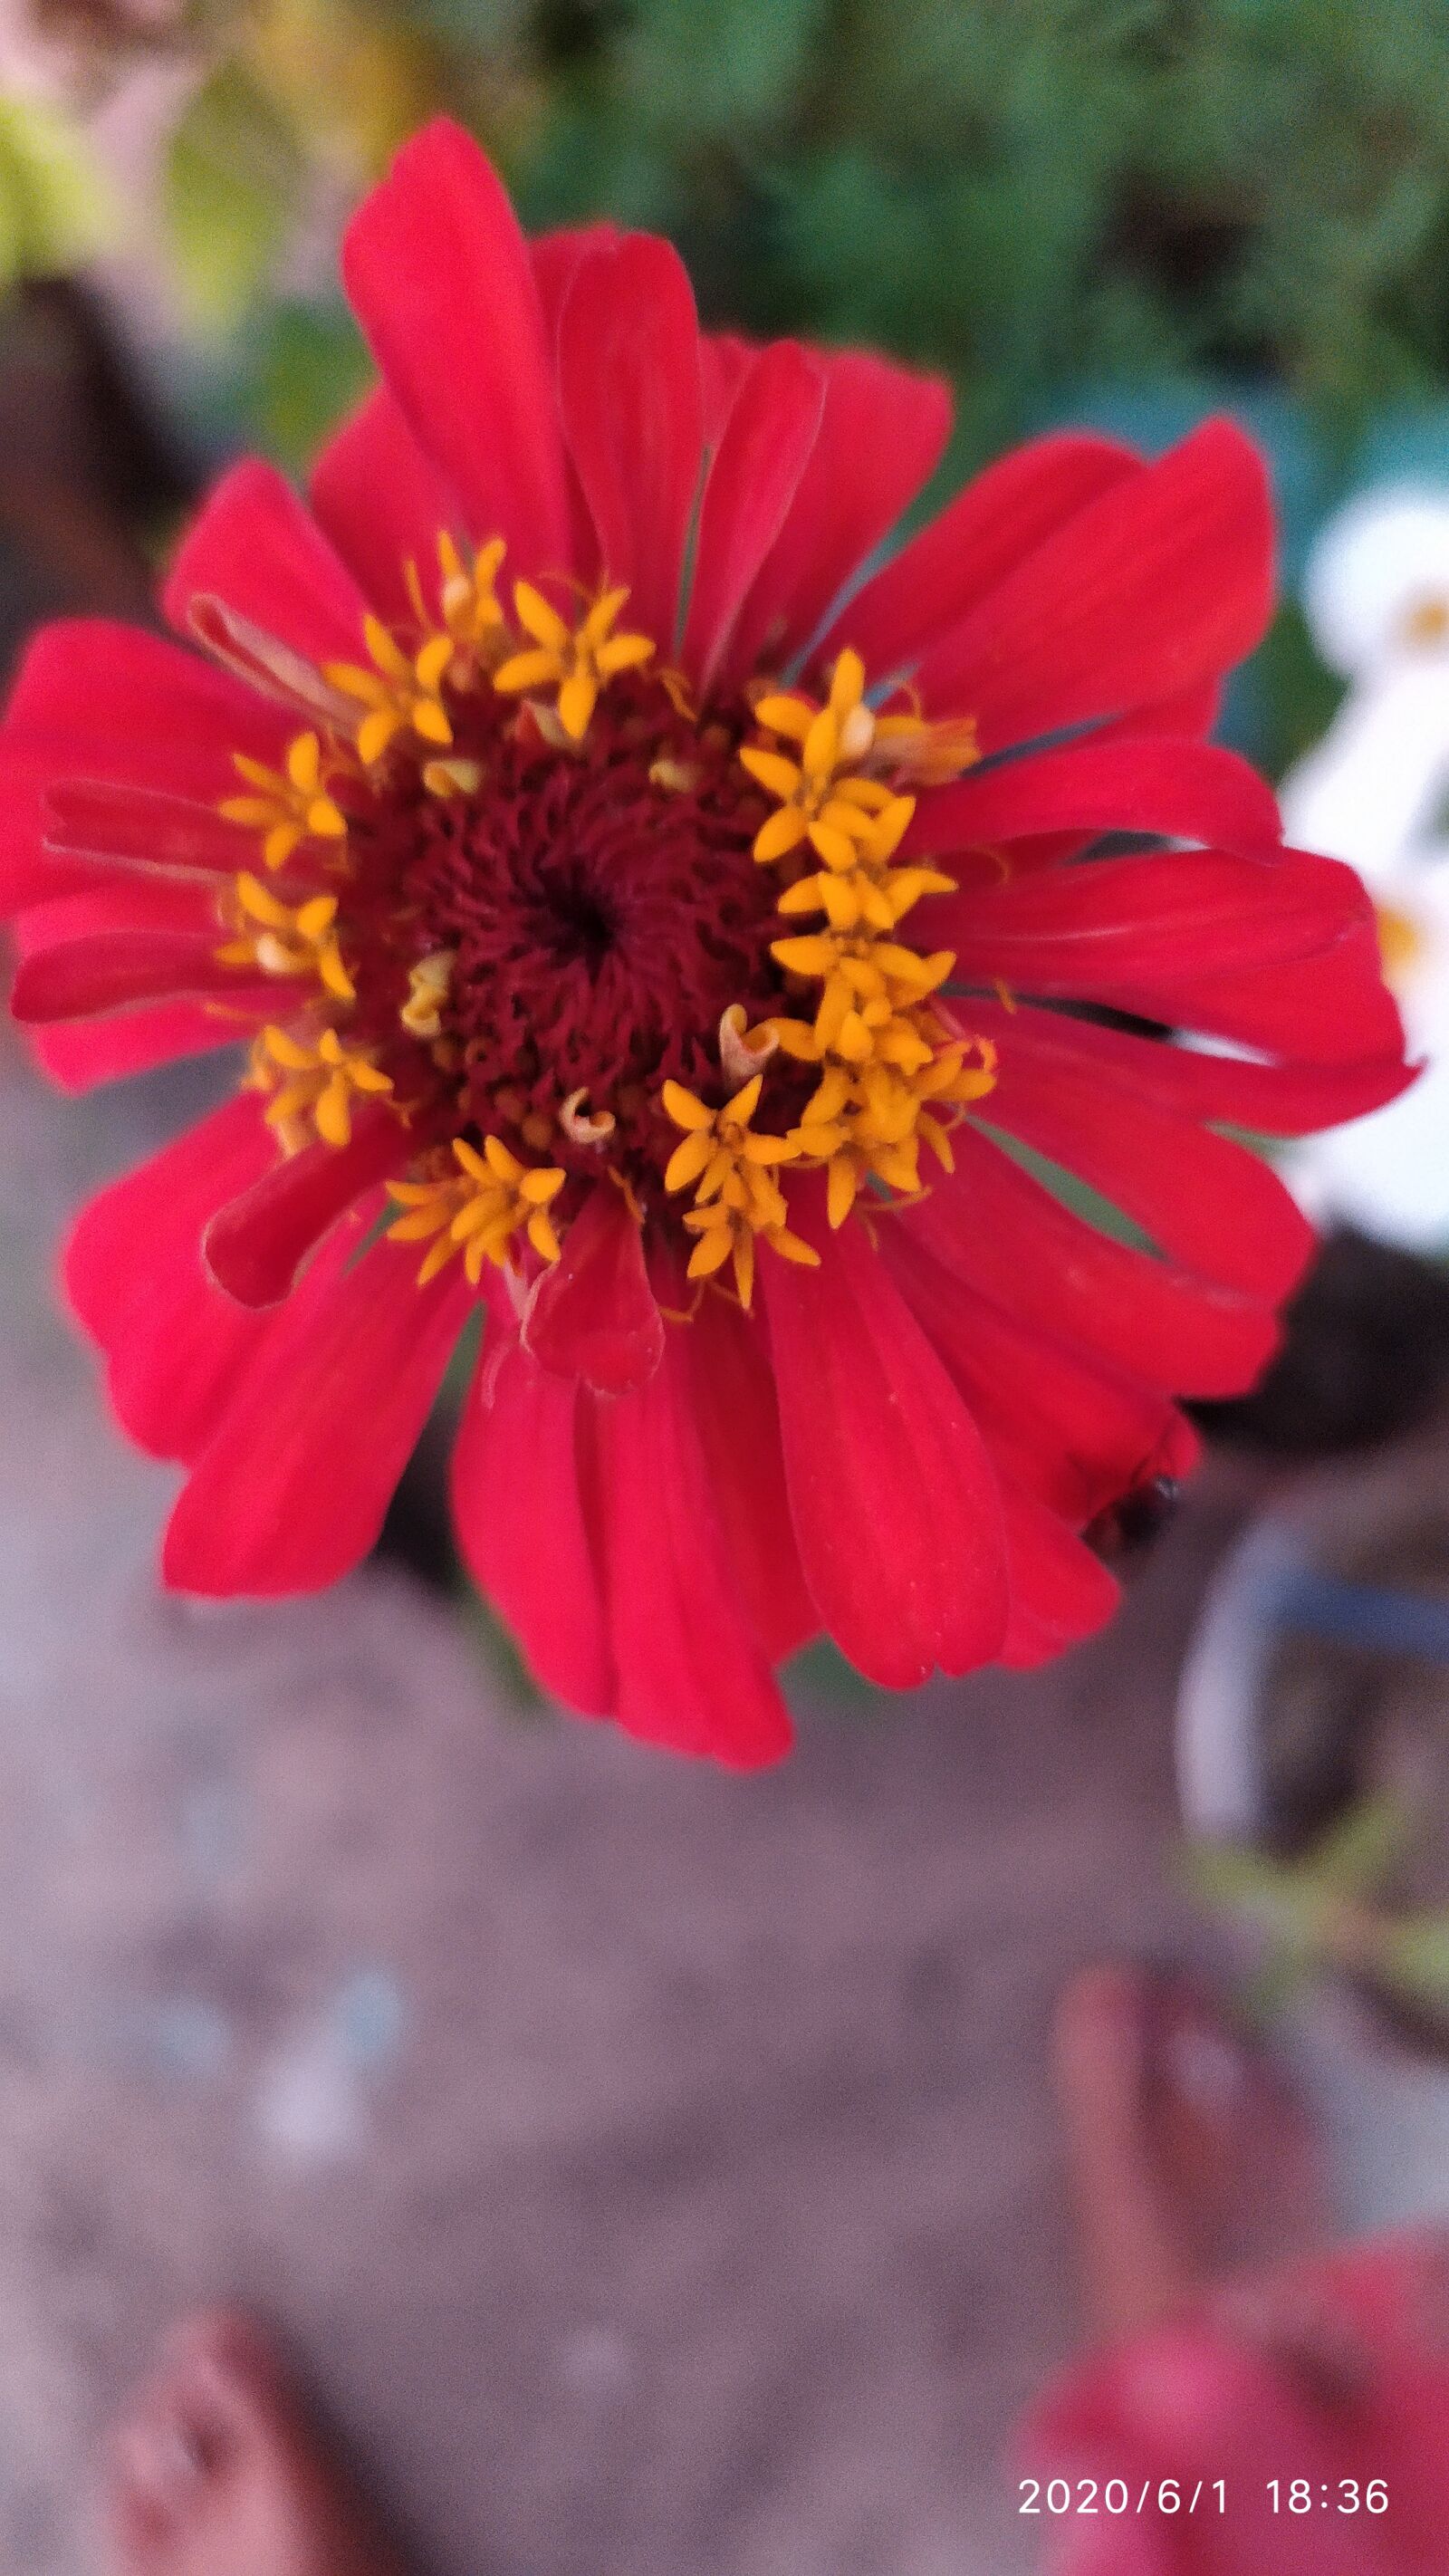 Xiaomi Redmi Note 7S sample photo. Red flower, blossom, nature photography